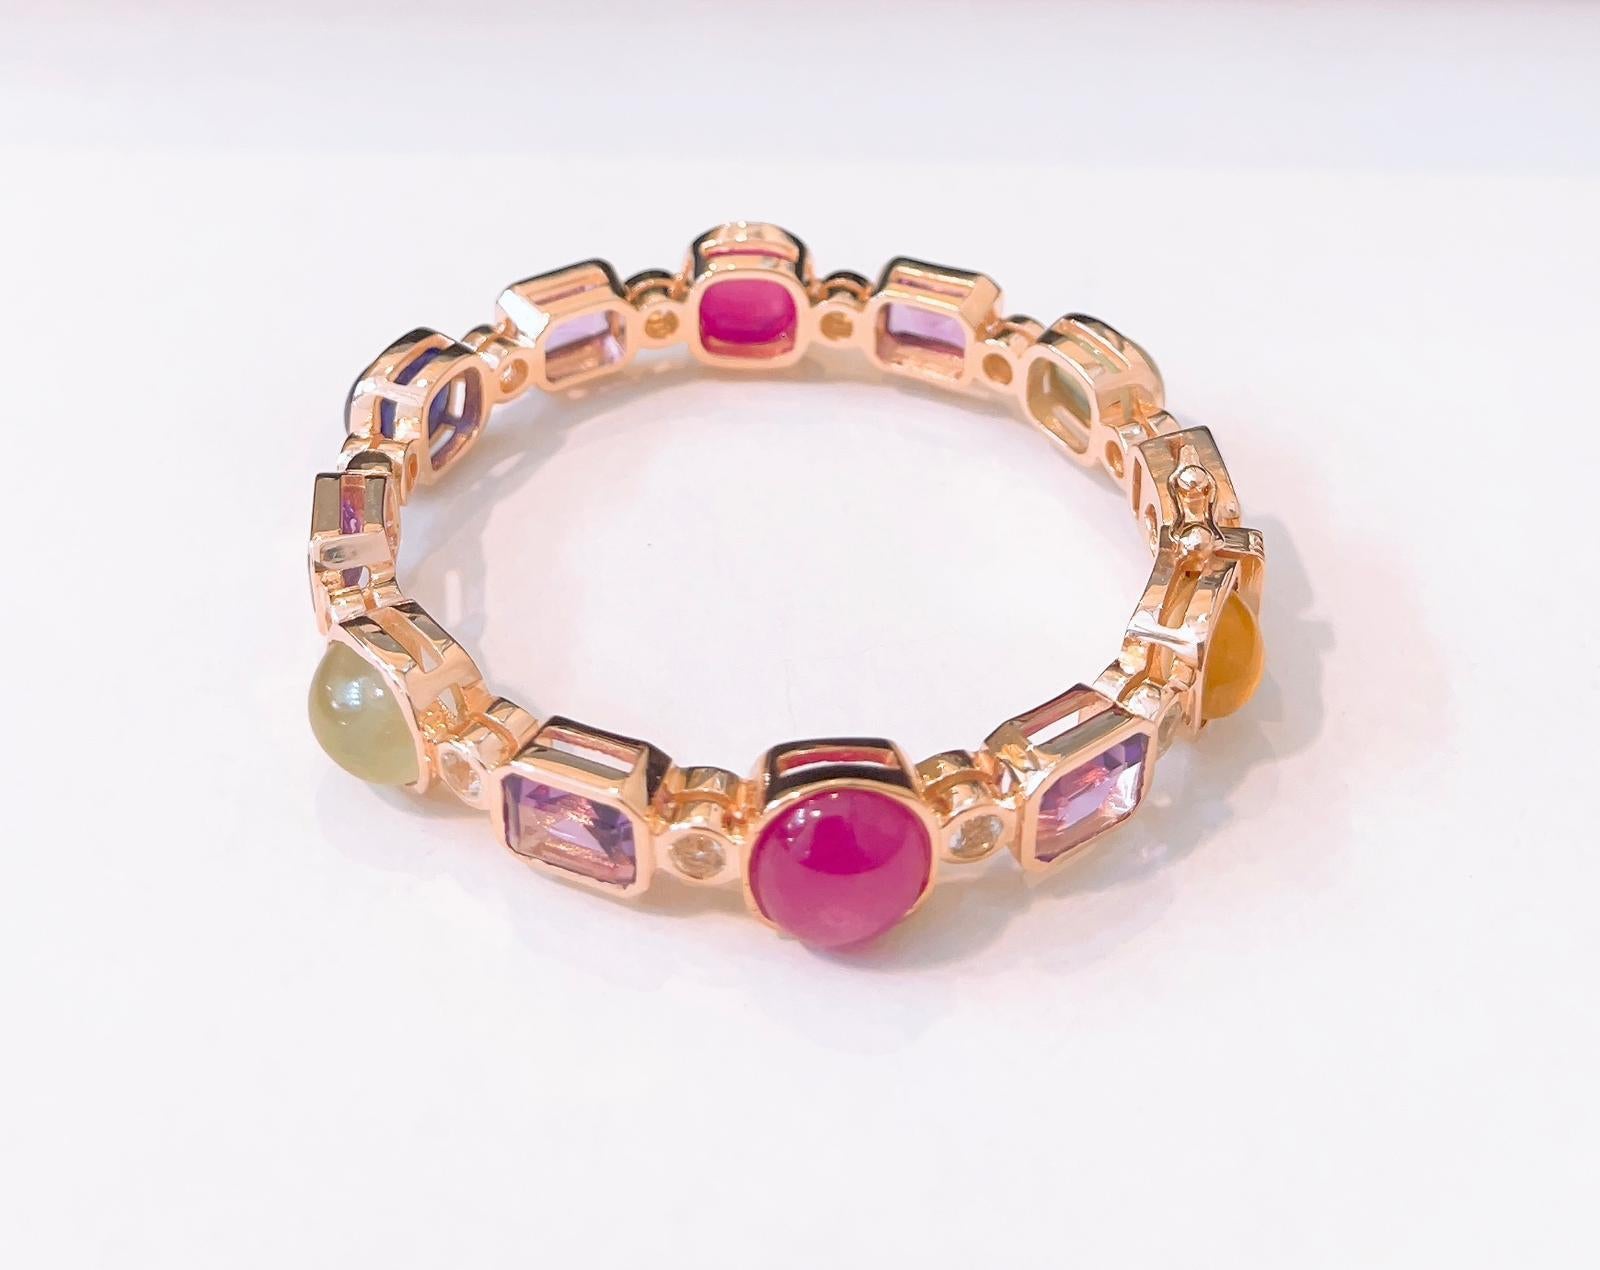 Bochic Multi Gem  “Capri” Bangle
Natural Green Amethyst Emerald cuts  - 8 Carats 
Natural Blue Sapphire Cabochon - 5 Carats 
Natural Red Ruby Cabochon - 9 Carats 
Set in 22K Gold and Silver 950
This bangle is perfect to wear day to night by Itself